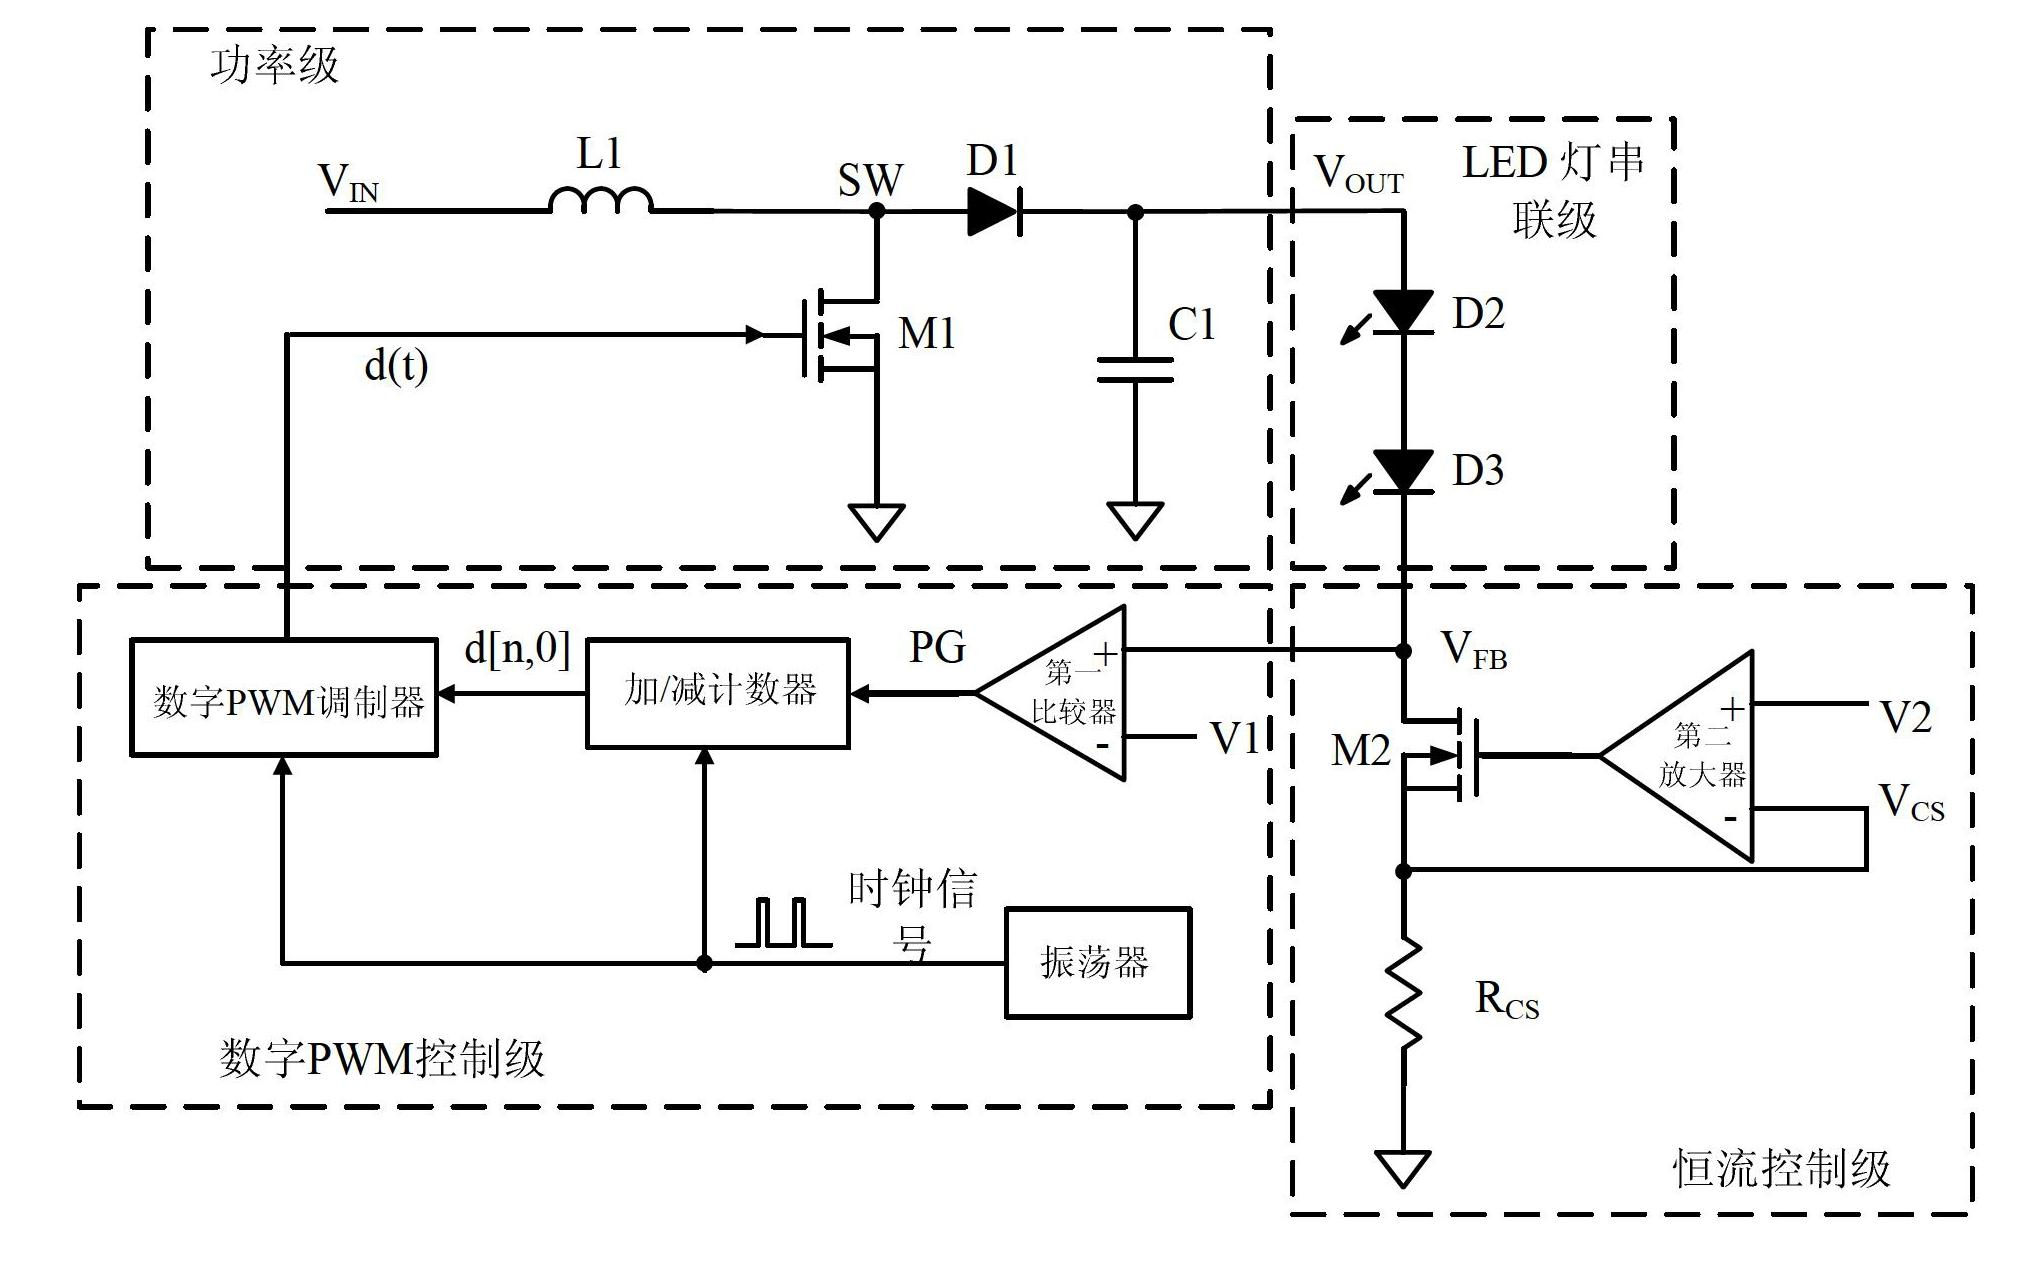 Constant current DC (Direct Current)-DC converter utilizing digital PWM (Pulse-Width Modulation) control and constant current LED (Light Emitting Diode) drive DC-DC converter